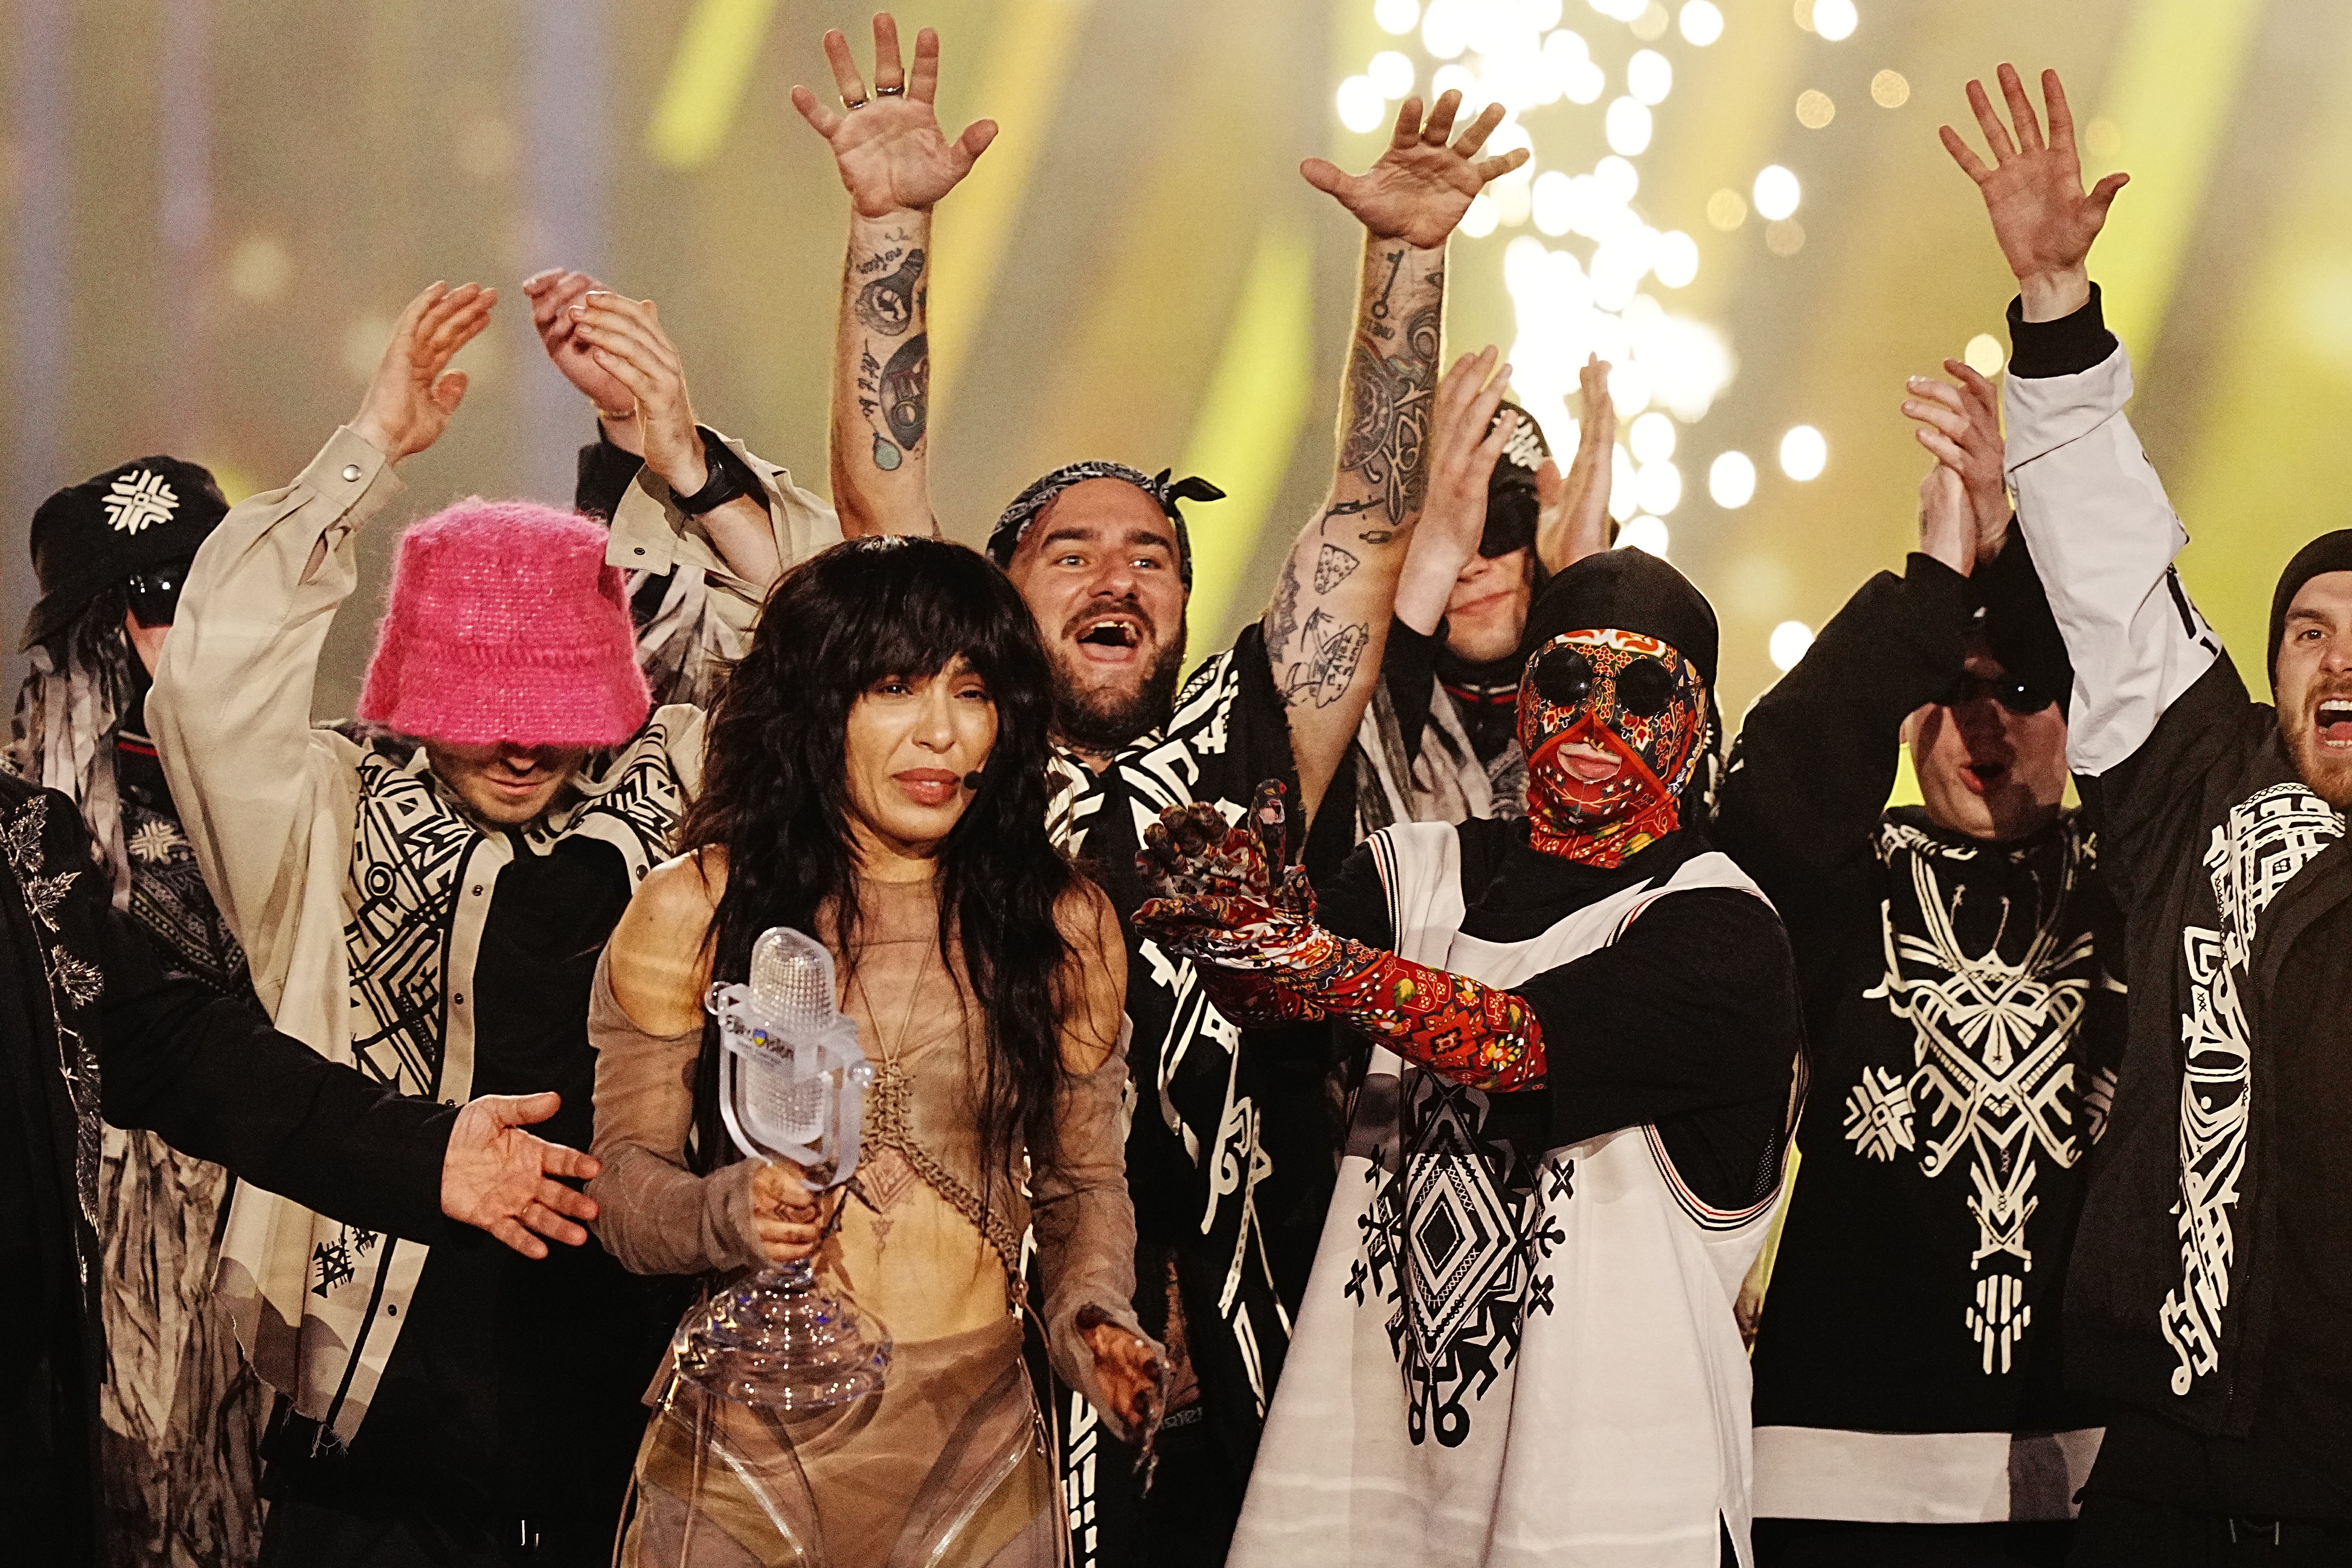 Next year’s competition will take place in Sweden following Loreen’s victory